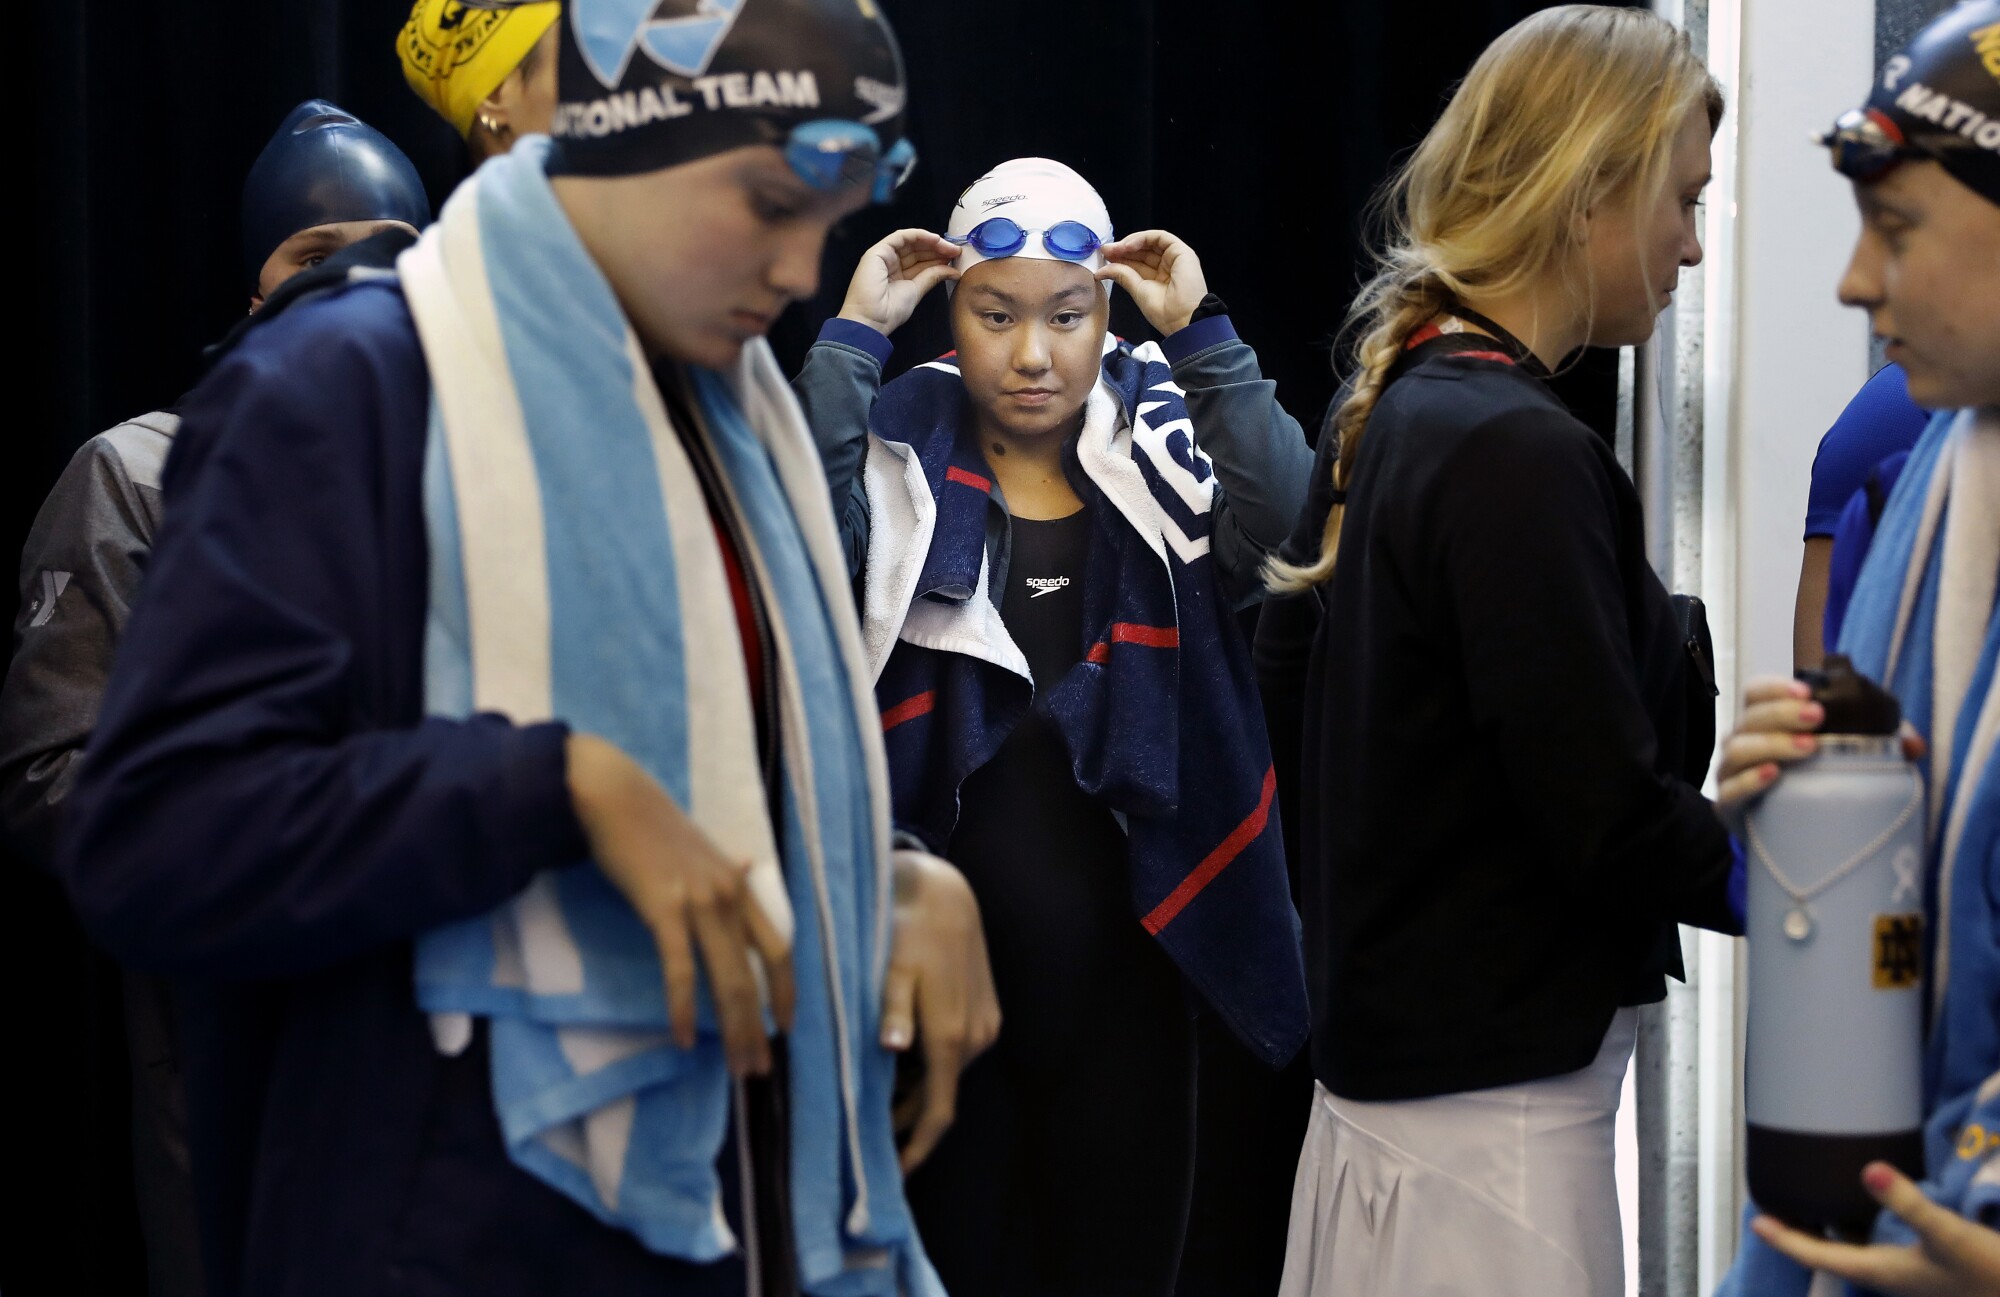 Kayla Han prepares to walk out to the pool during the 2022 Phillips 66 International Team Trials